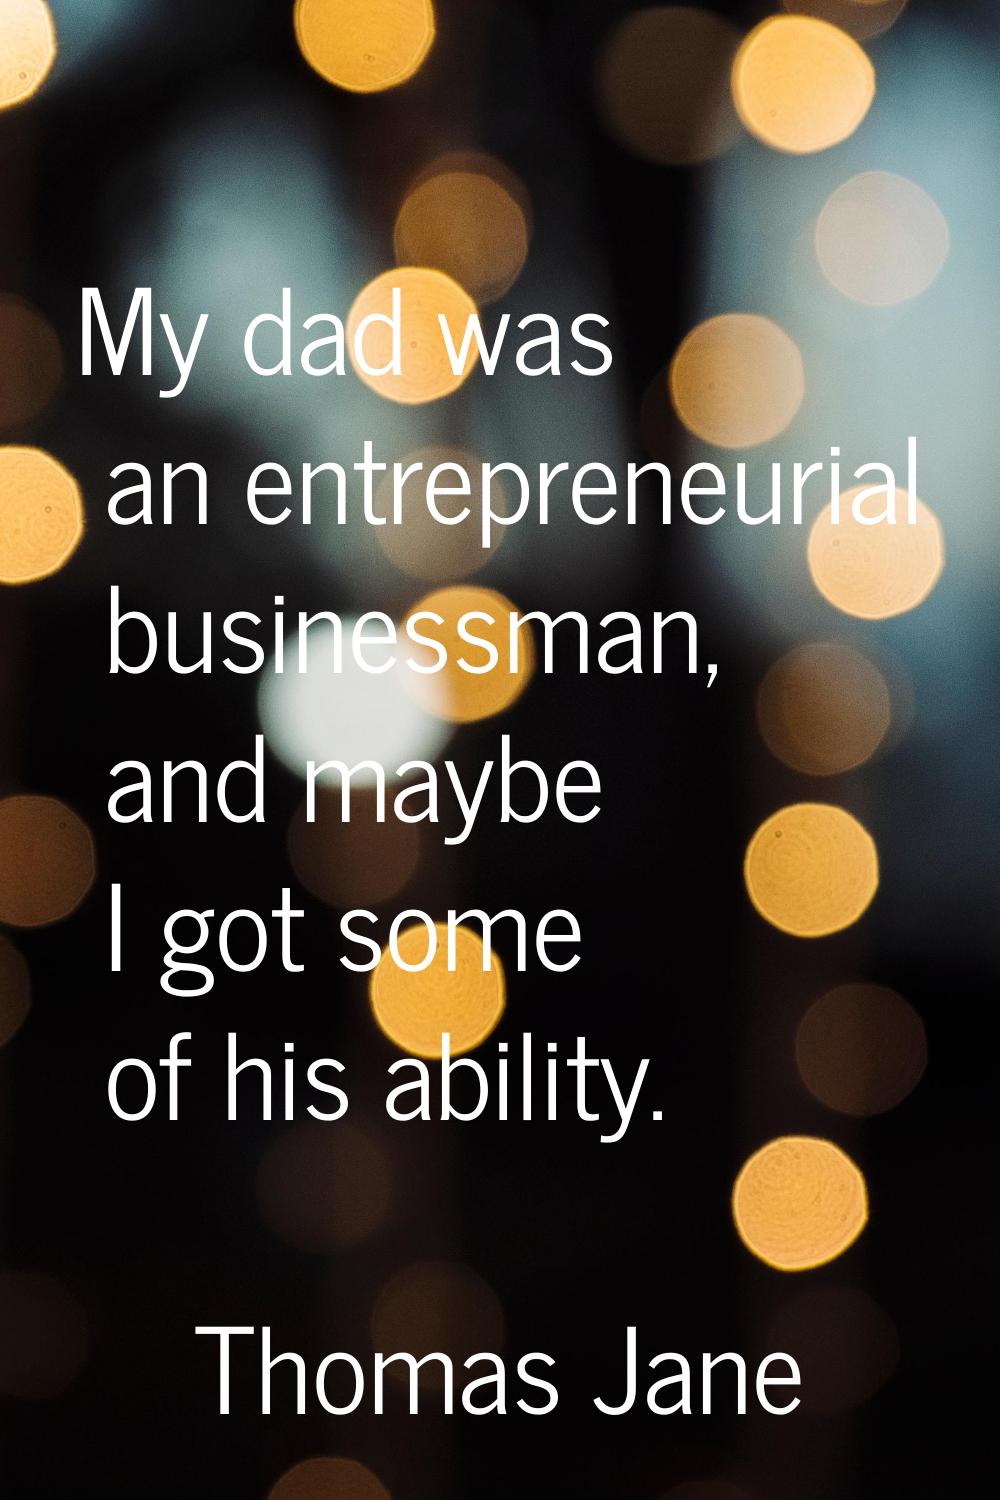 My dad was an entrepreneurial businessman, and maybe I got some of his ability.